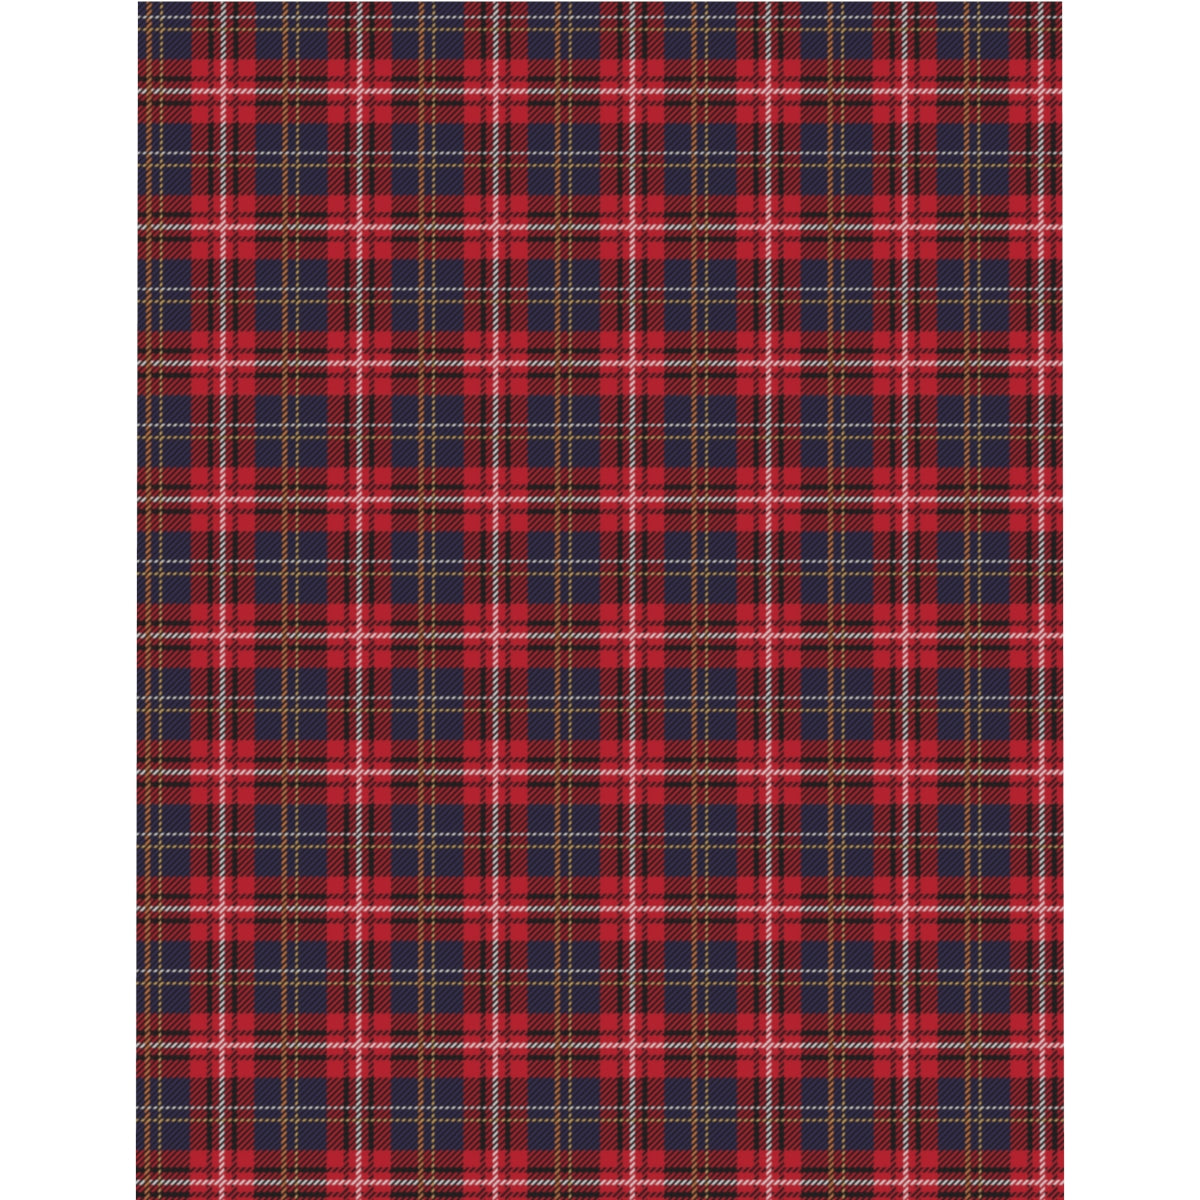 Red Plaid Duvet Cover, Tartan Check Microfiber Full Queen Twin Unique Bed Cover Modern Home Bedding Bedroom Decor Starcove Fashion